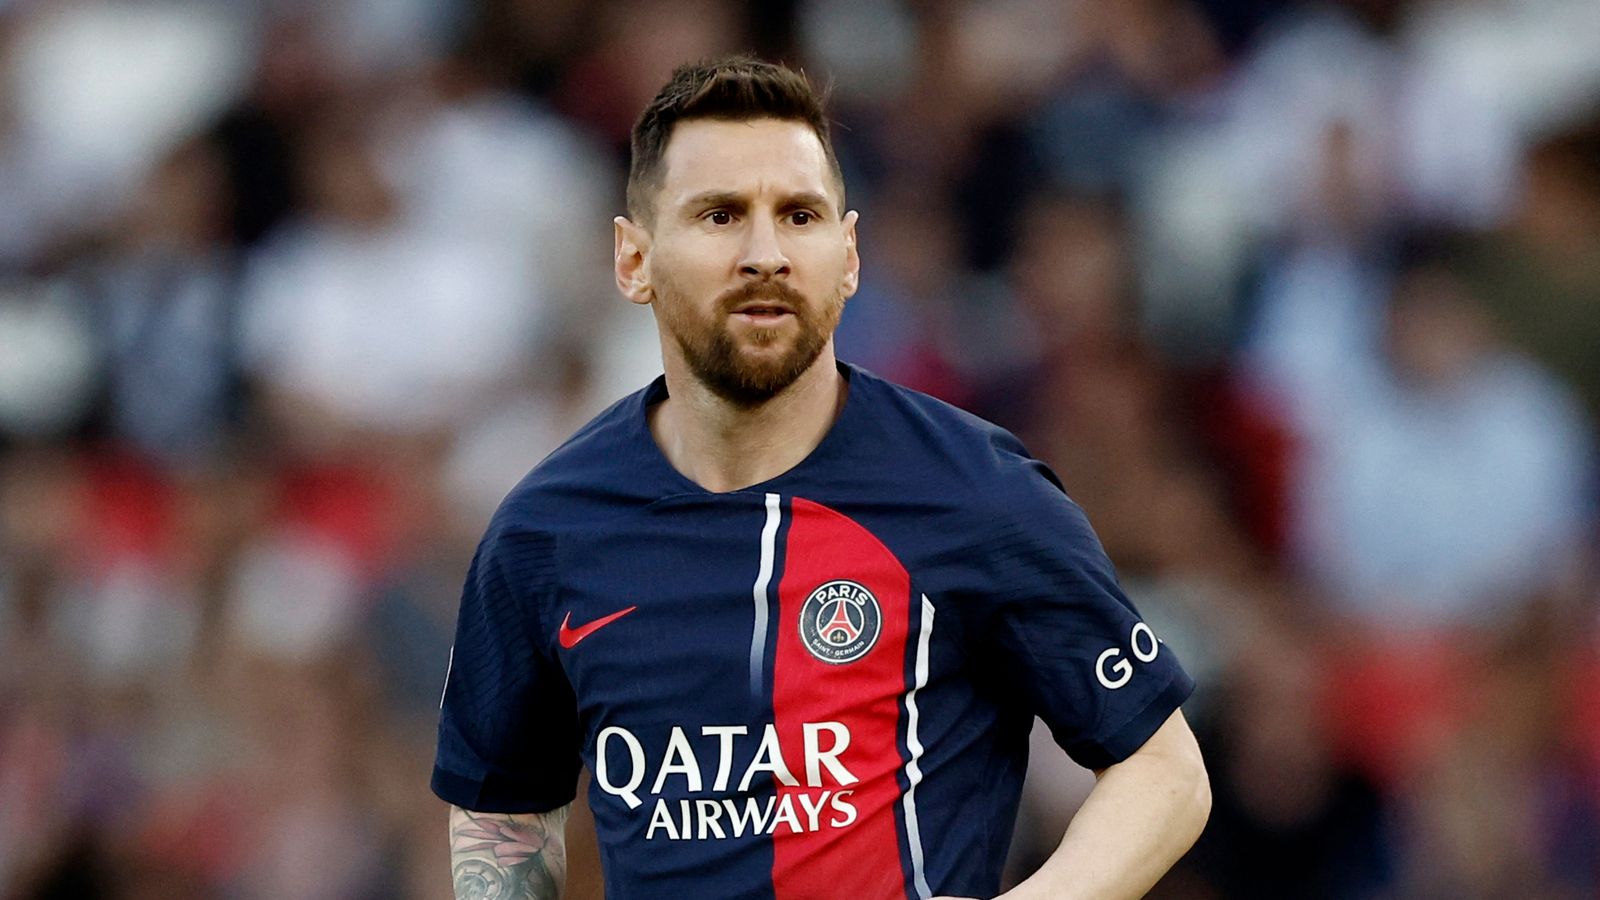 How much will Lionel Messi's new Inter Miami shirt cost?